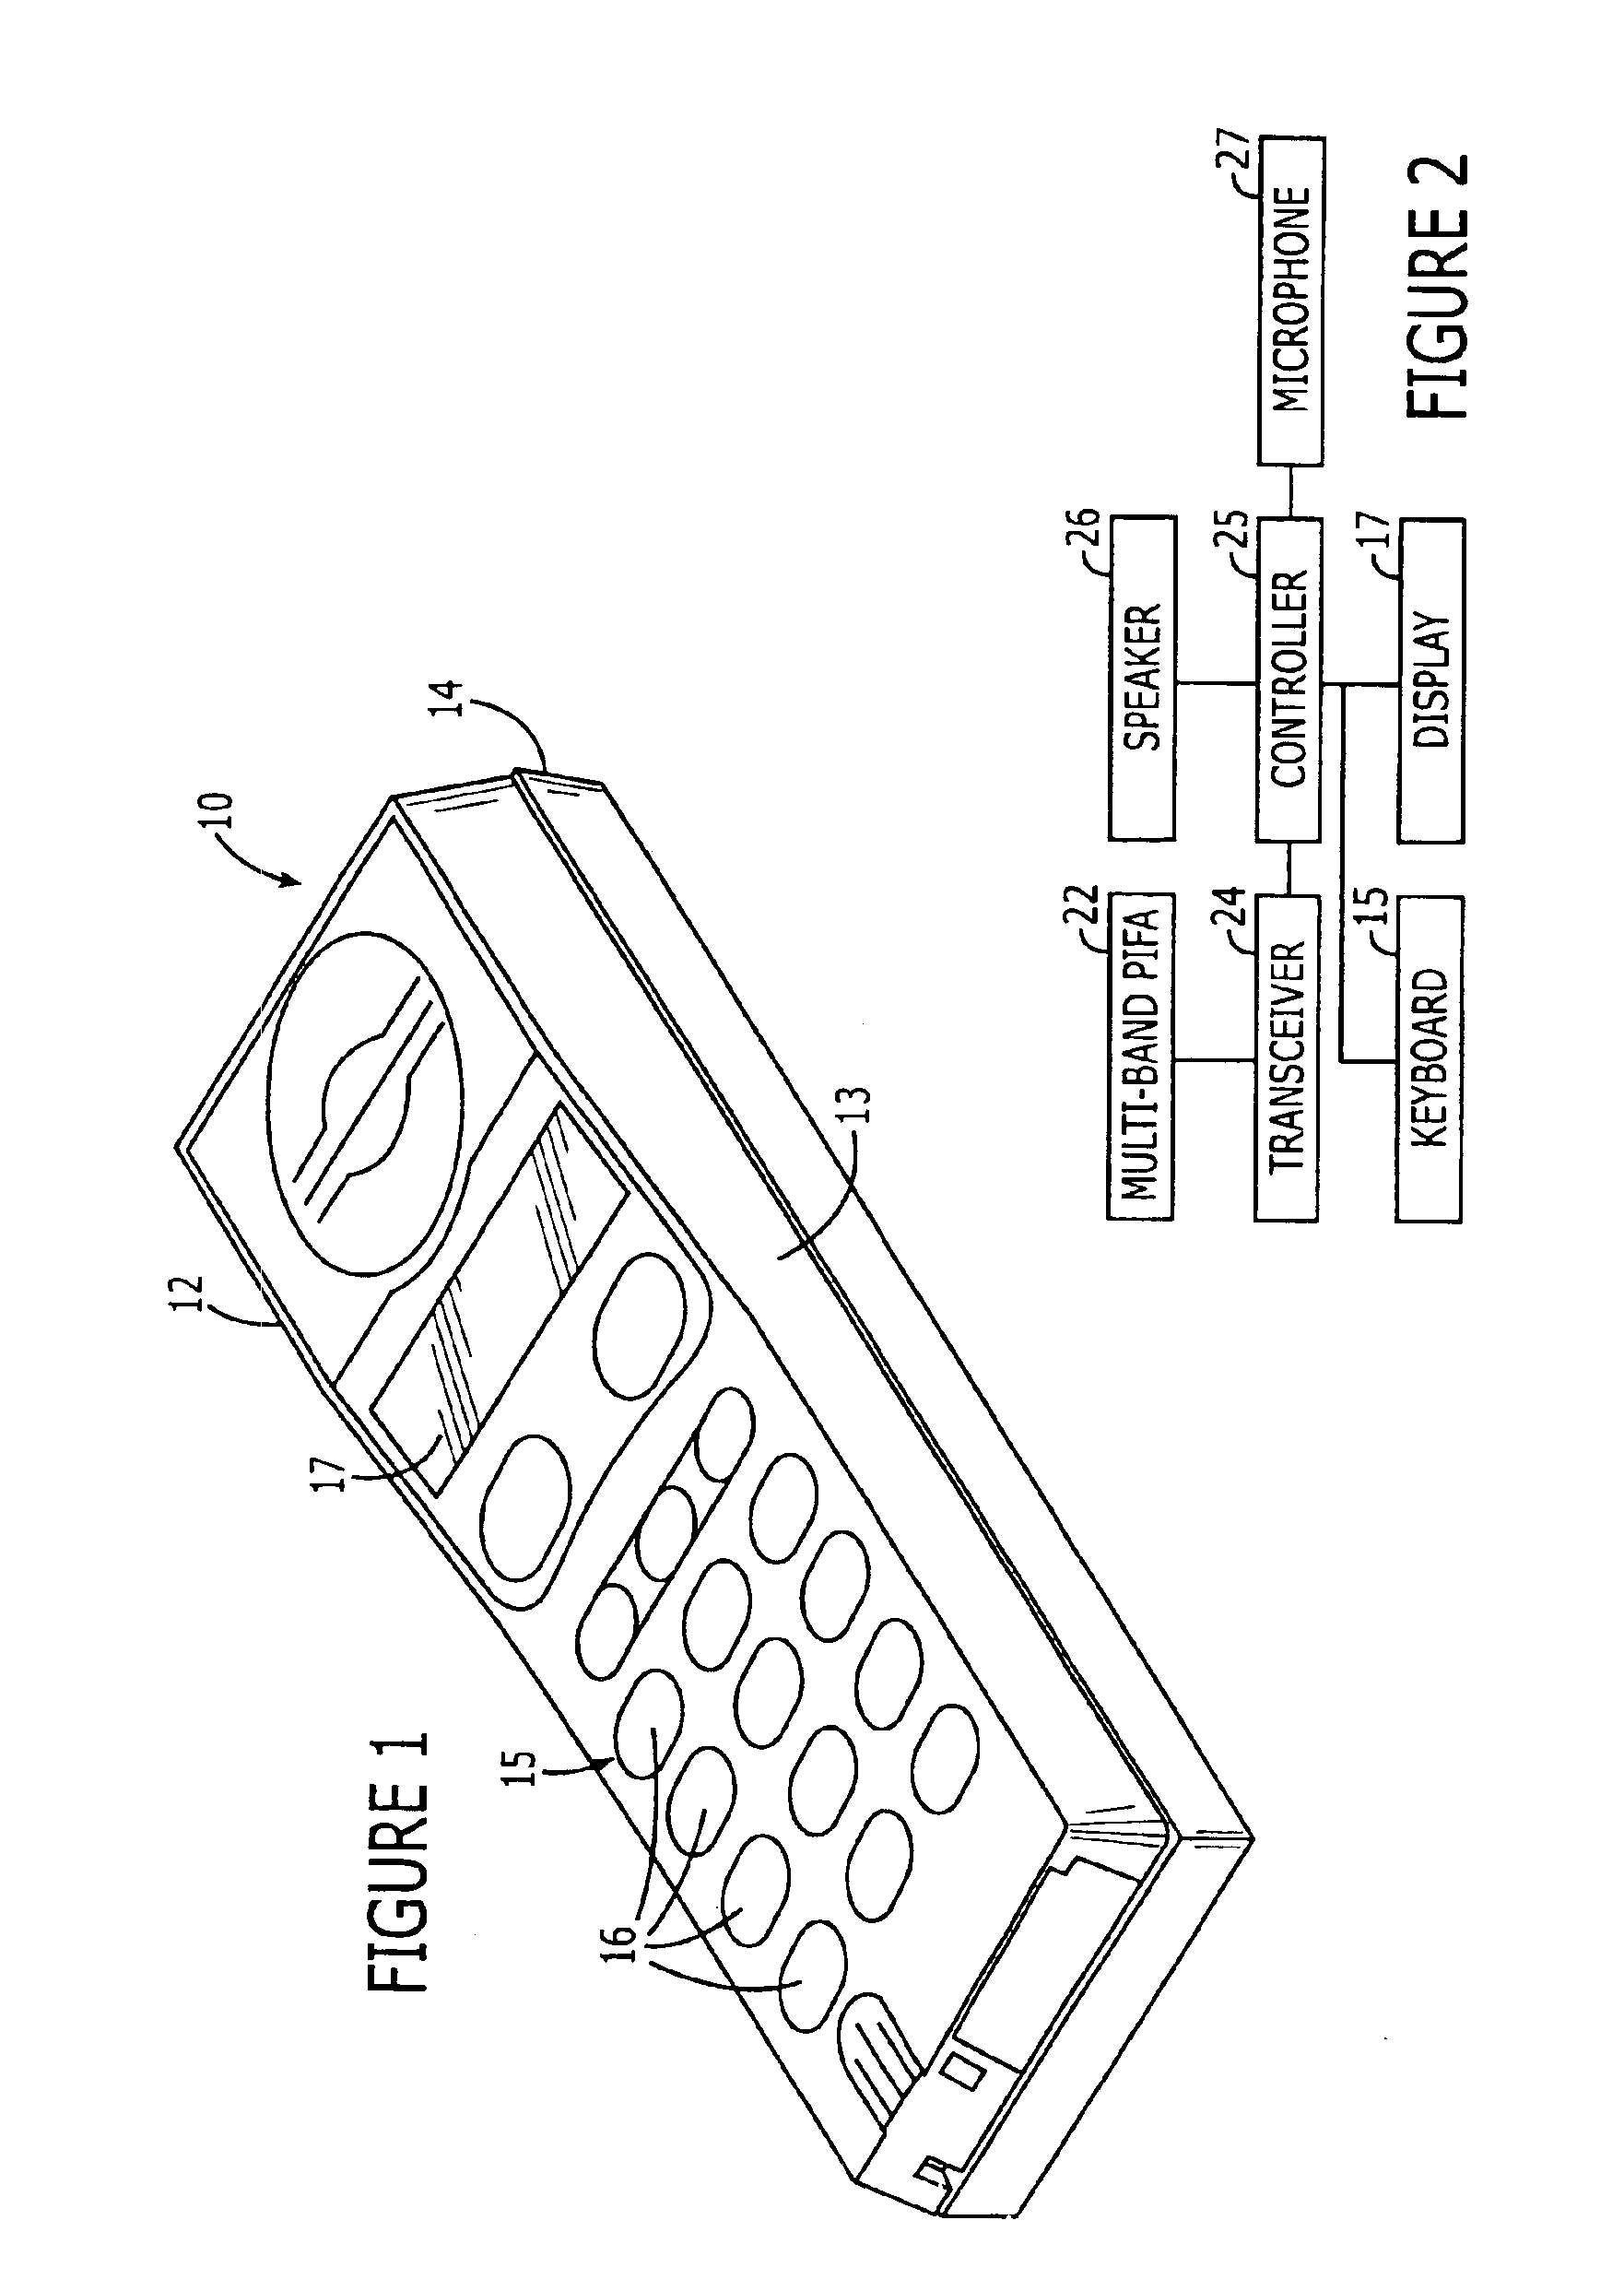 Multi-band planar inverted-F antennas including floating parasitic elements and wireless terminals incorporating the same